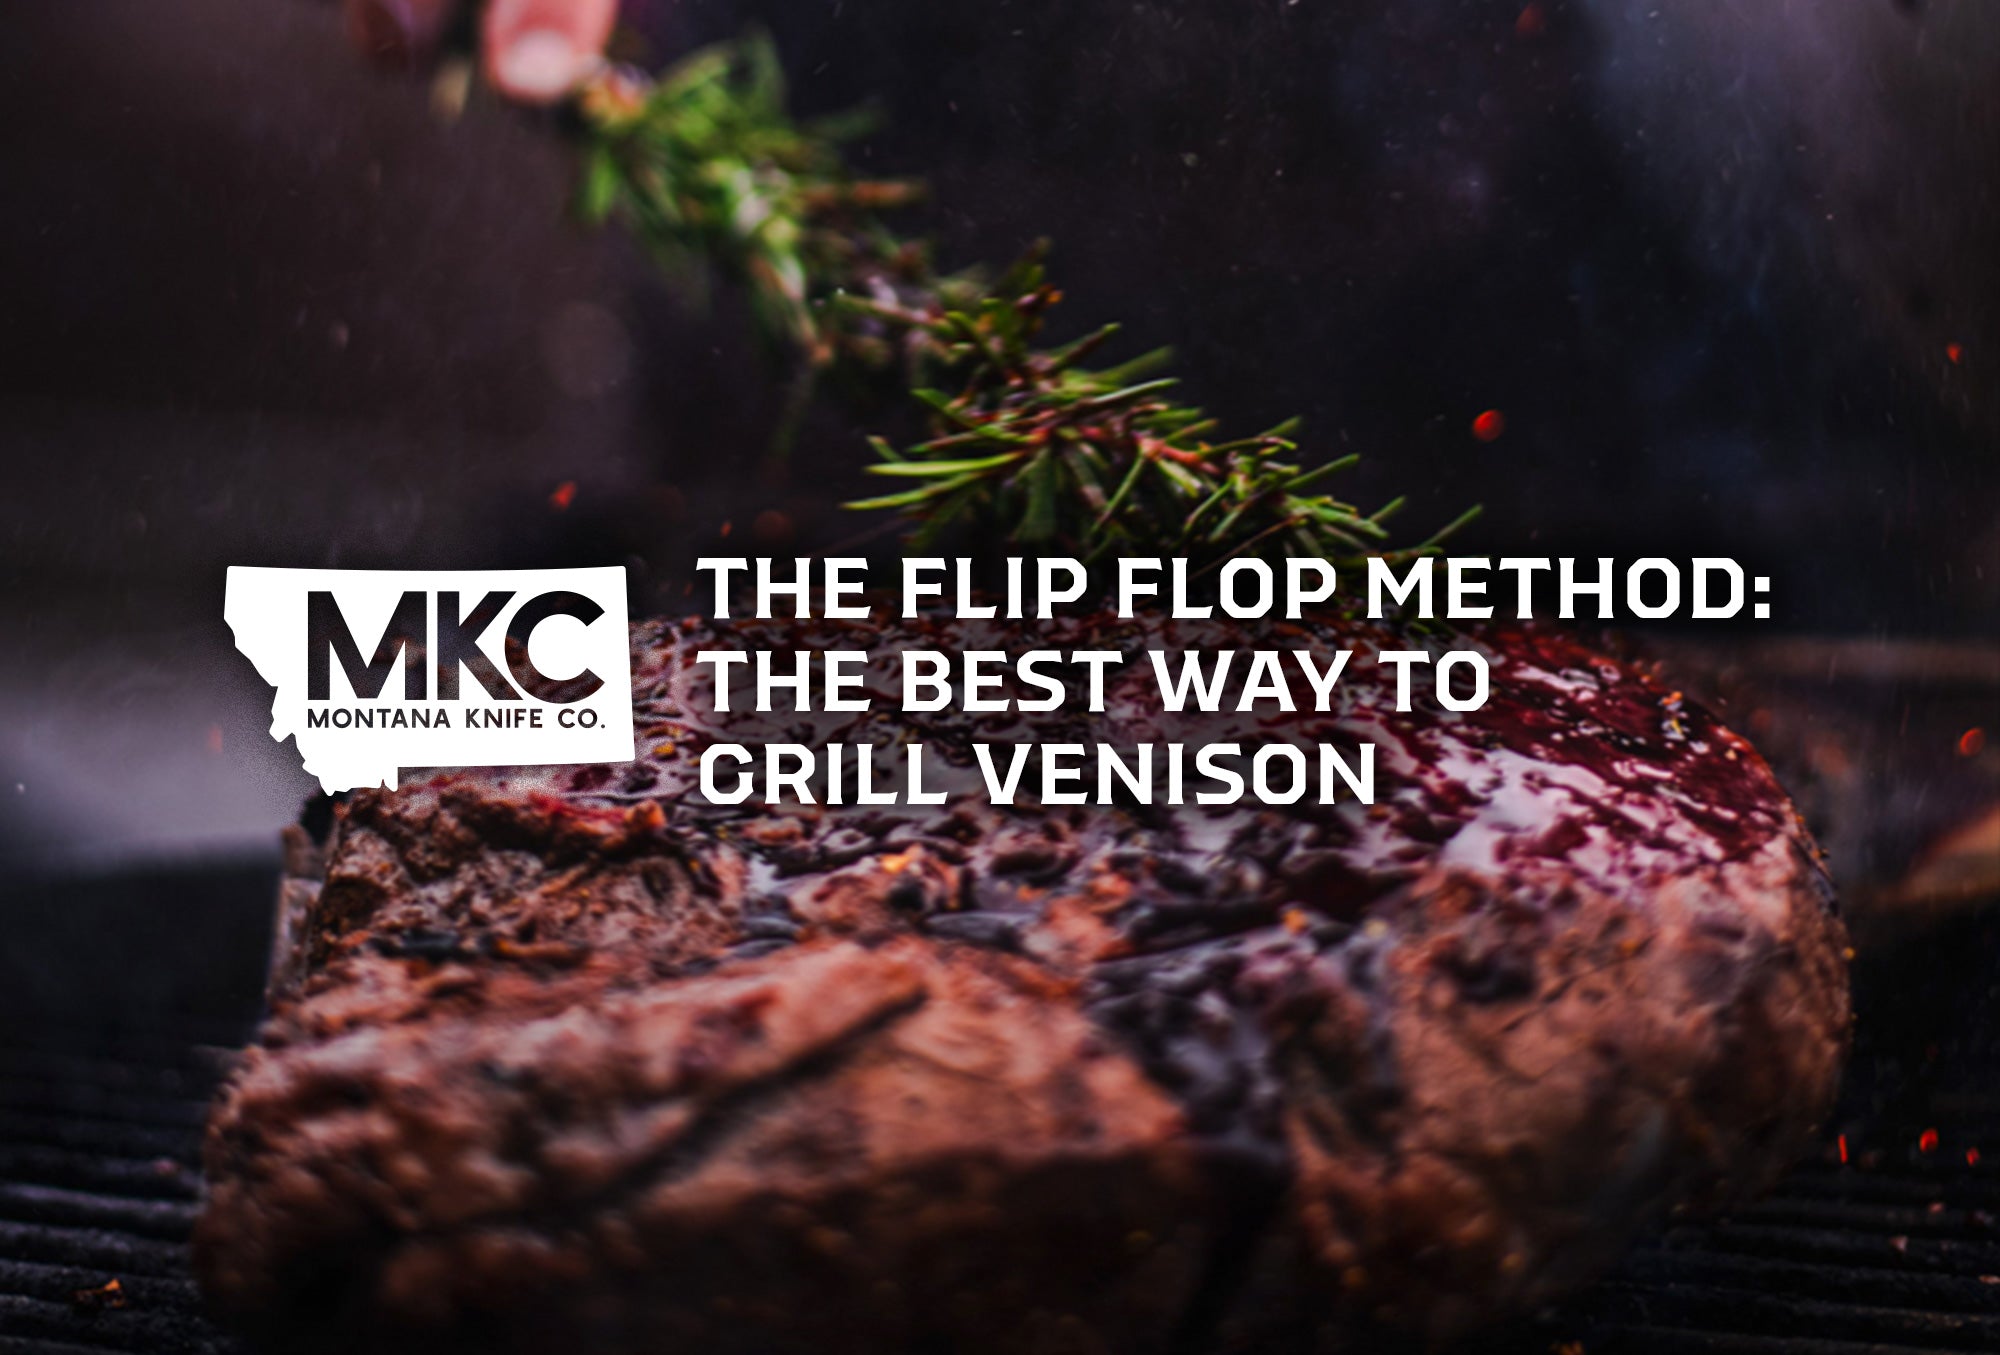 A rosemary mop bastes a venison leg on a hot grill for a grilling technique known as the flip flop method.